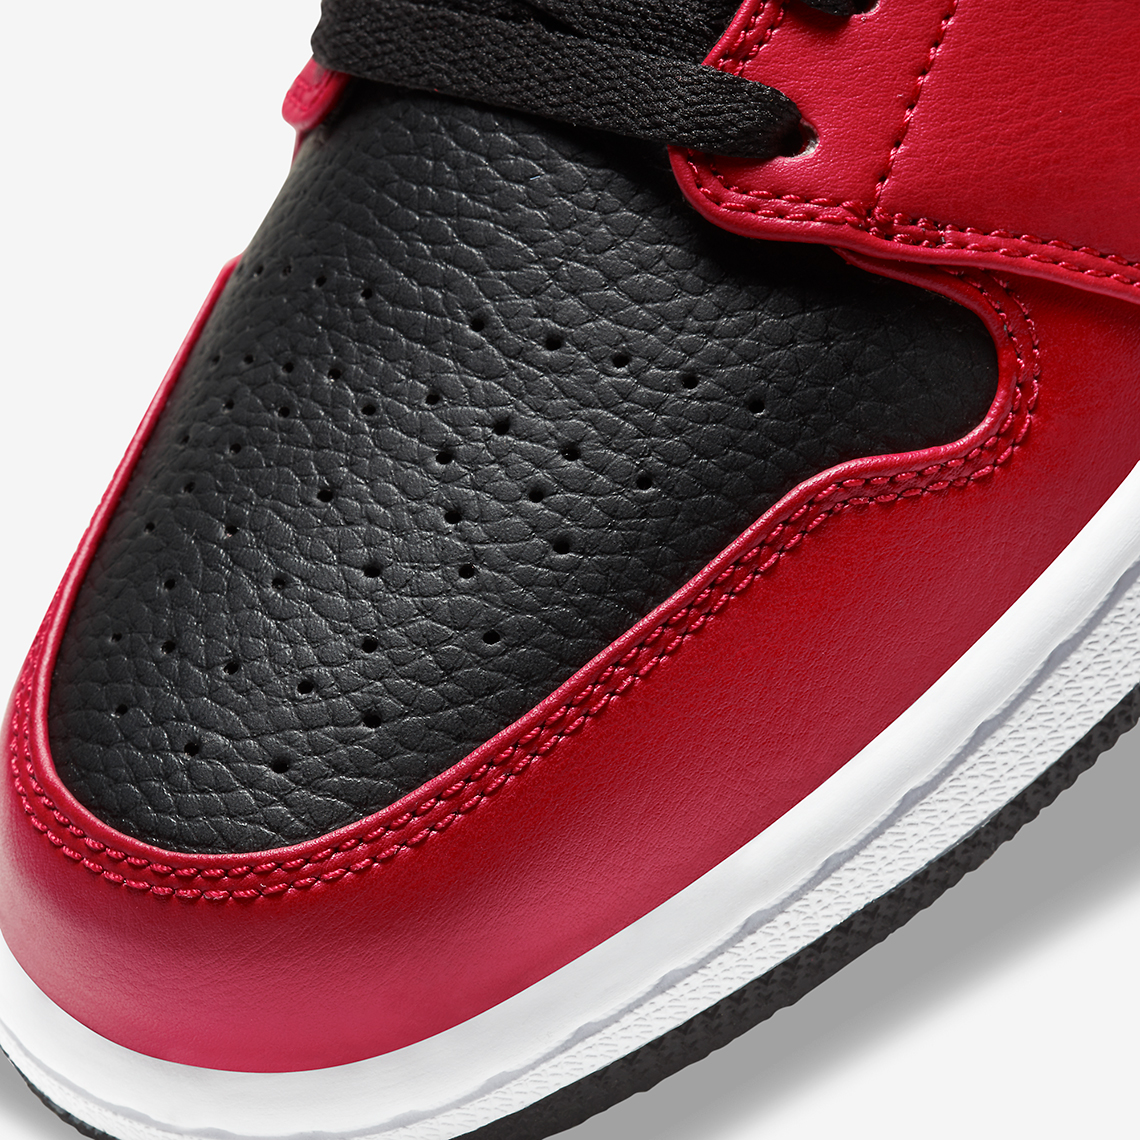 Tumbled leathers appear on this inverted Air Jordan 1 Low "Banned"